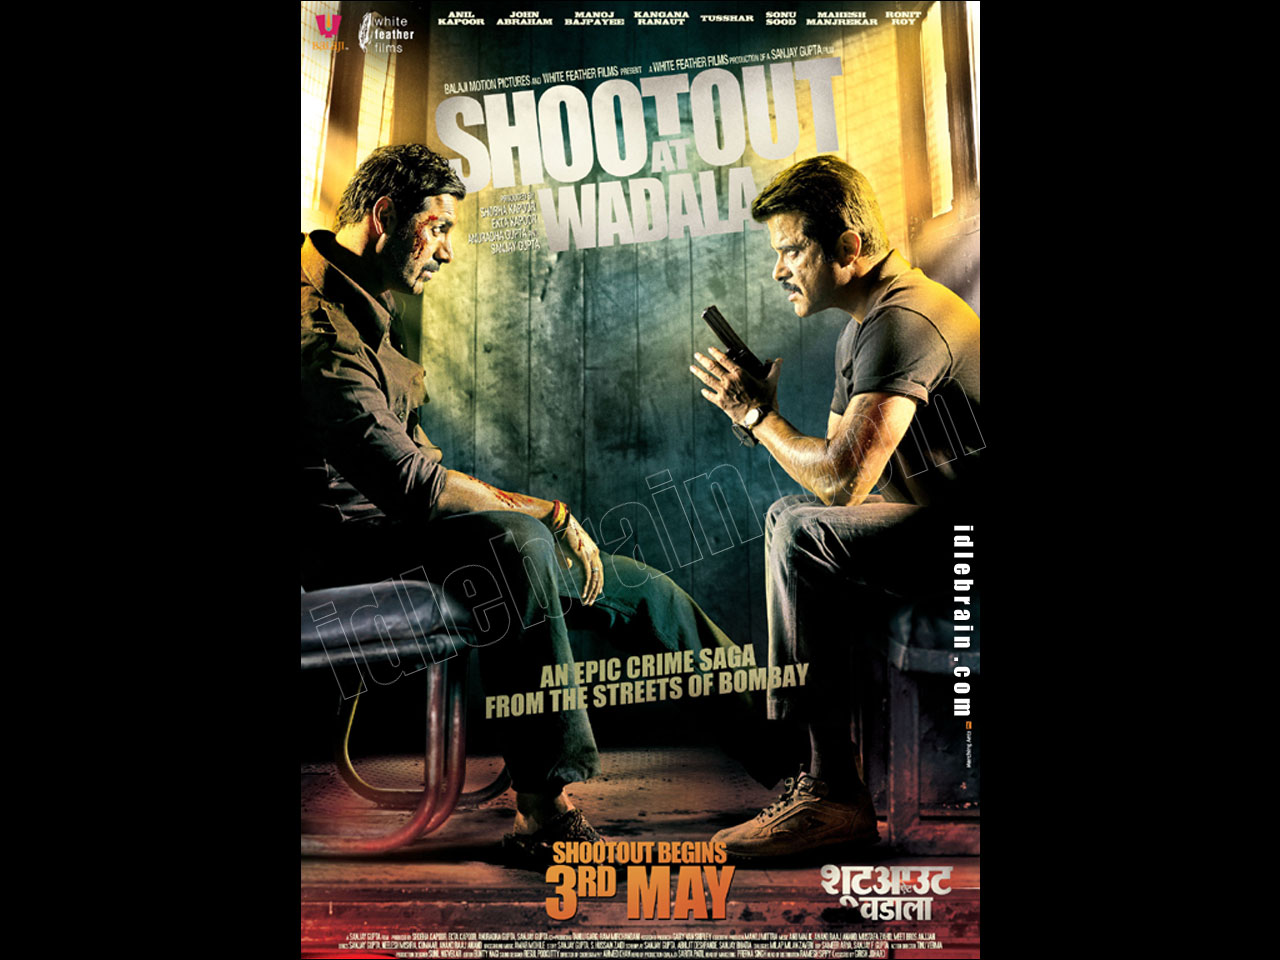 20 Best Shootout at wadala ideas | shootout at wadala, background images  wallpapers, iphone background images